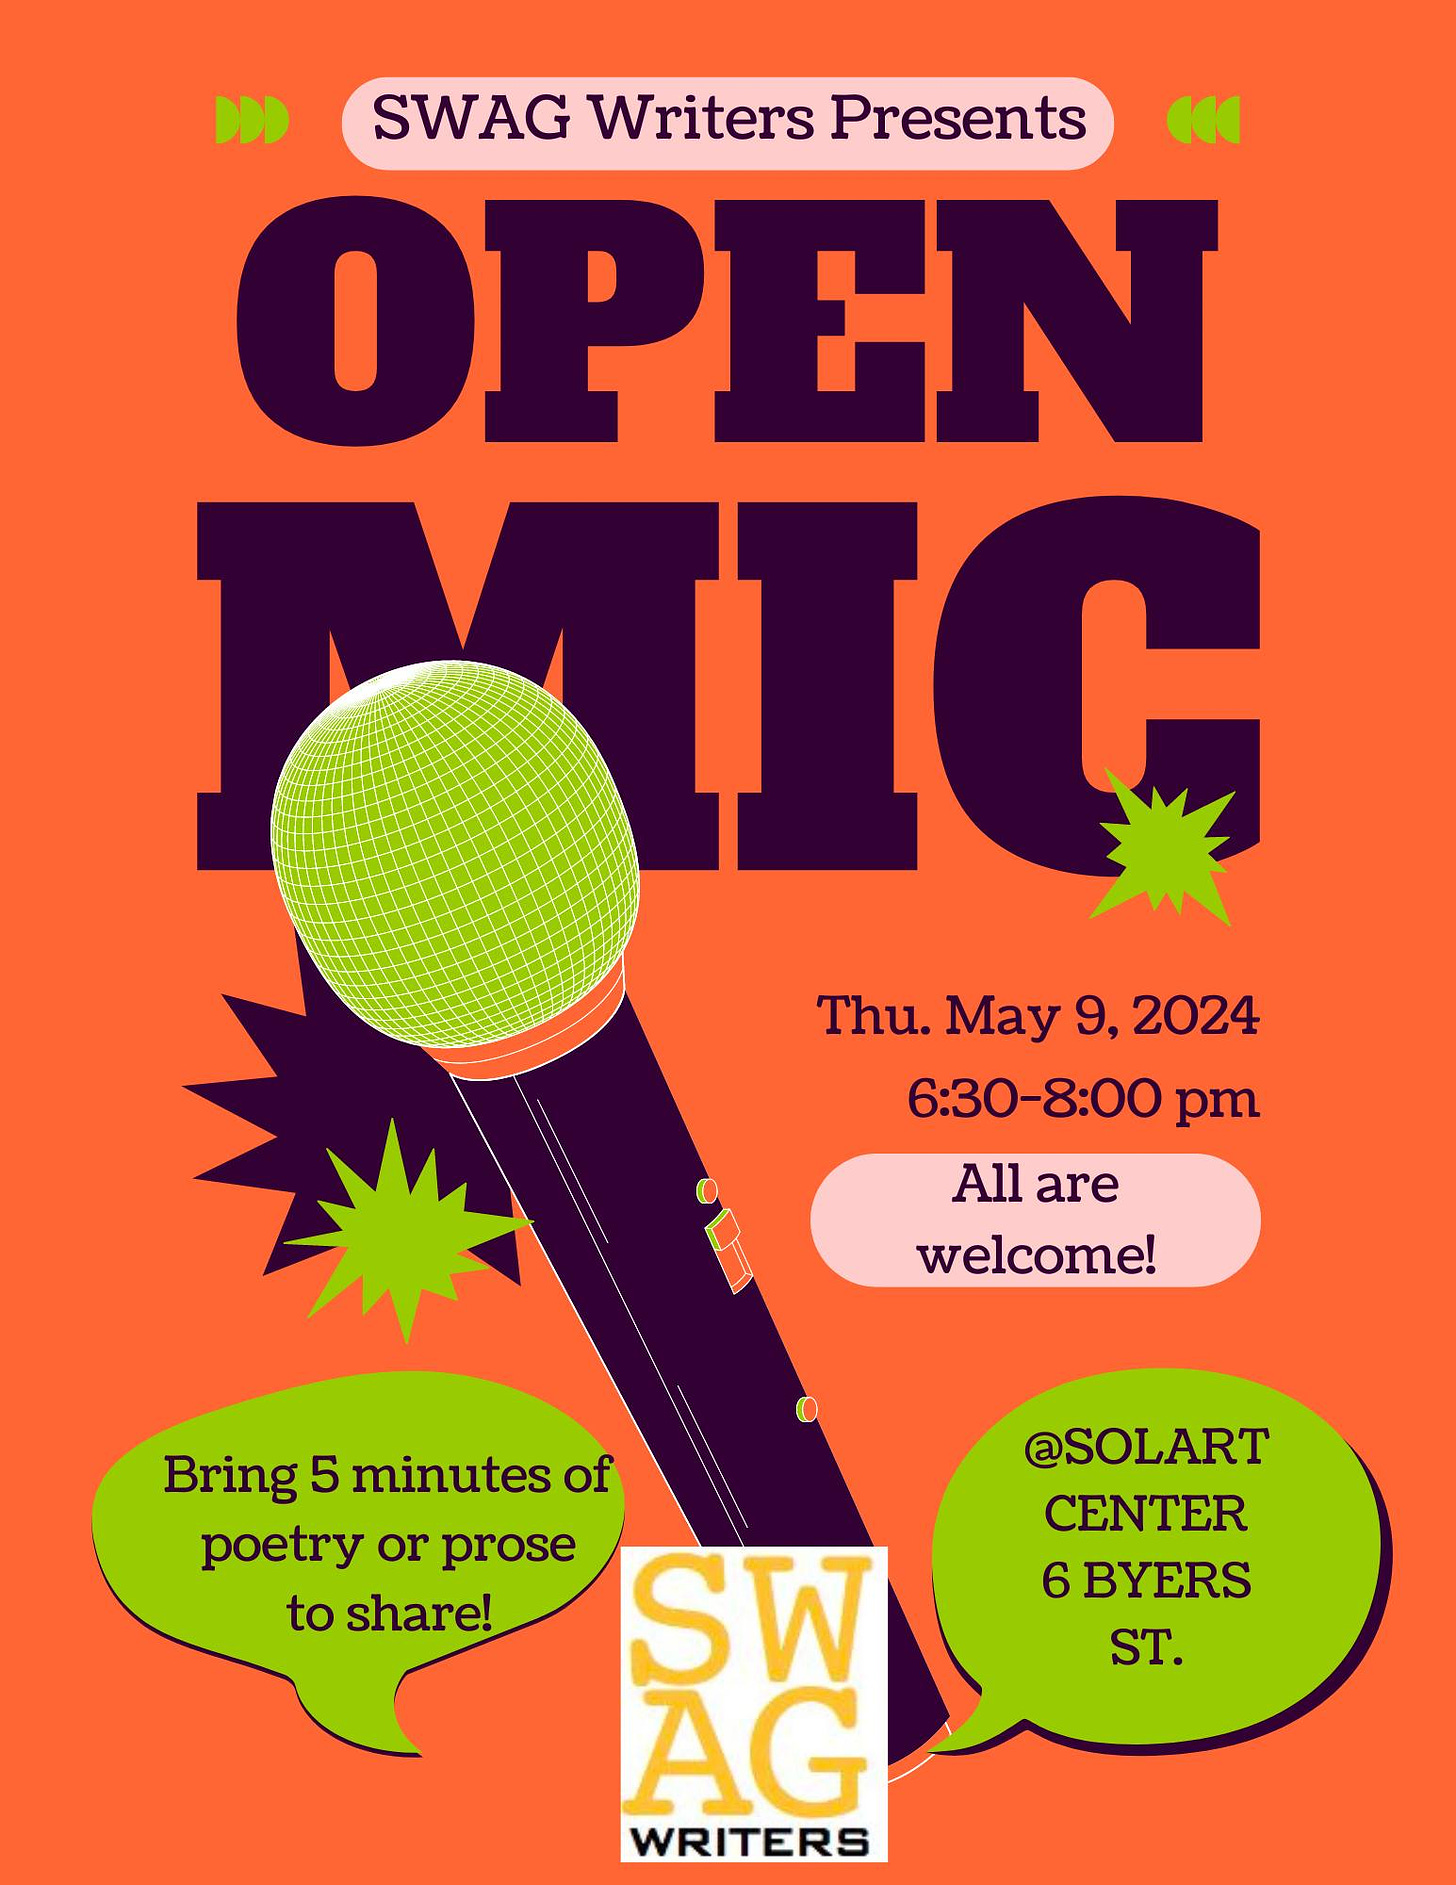 May be an image of text that says '" SWAG Writers Presents " OPEN MIG Thu. May Thu.May9,2024 9, 2024 6:30-8:00 8:00 pm 6:30－ are welcome! Bring 5 minutes of poetry or prose to share! SW AG WRITERS @SOLART CENTER 6 BYERS ST.'